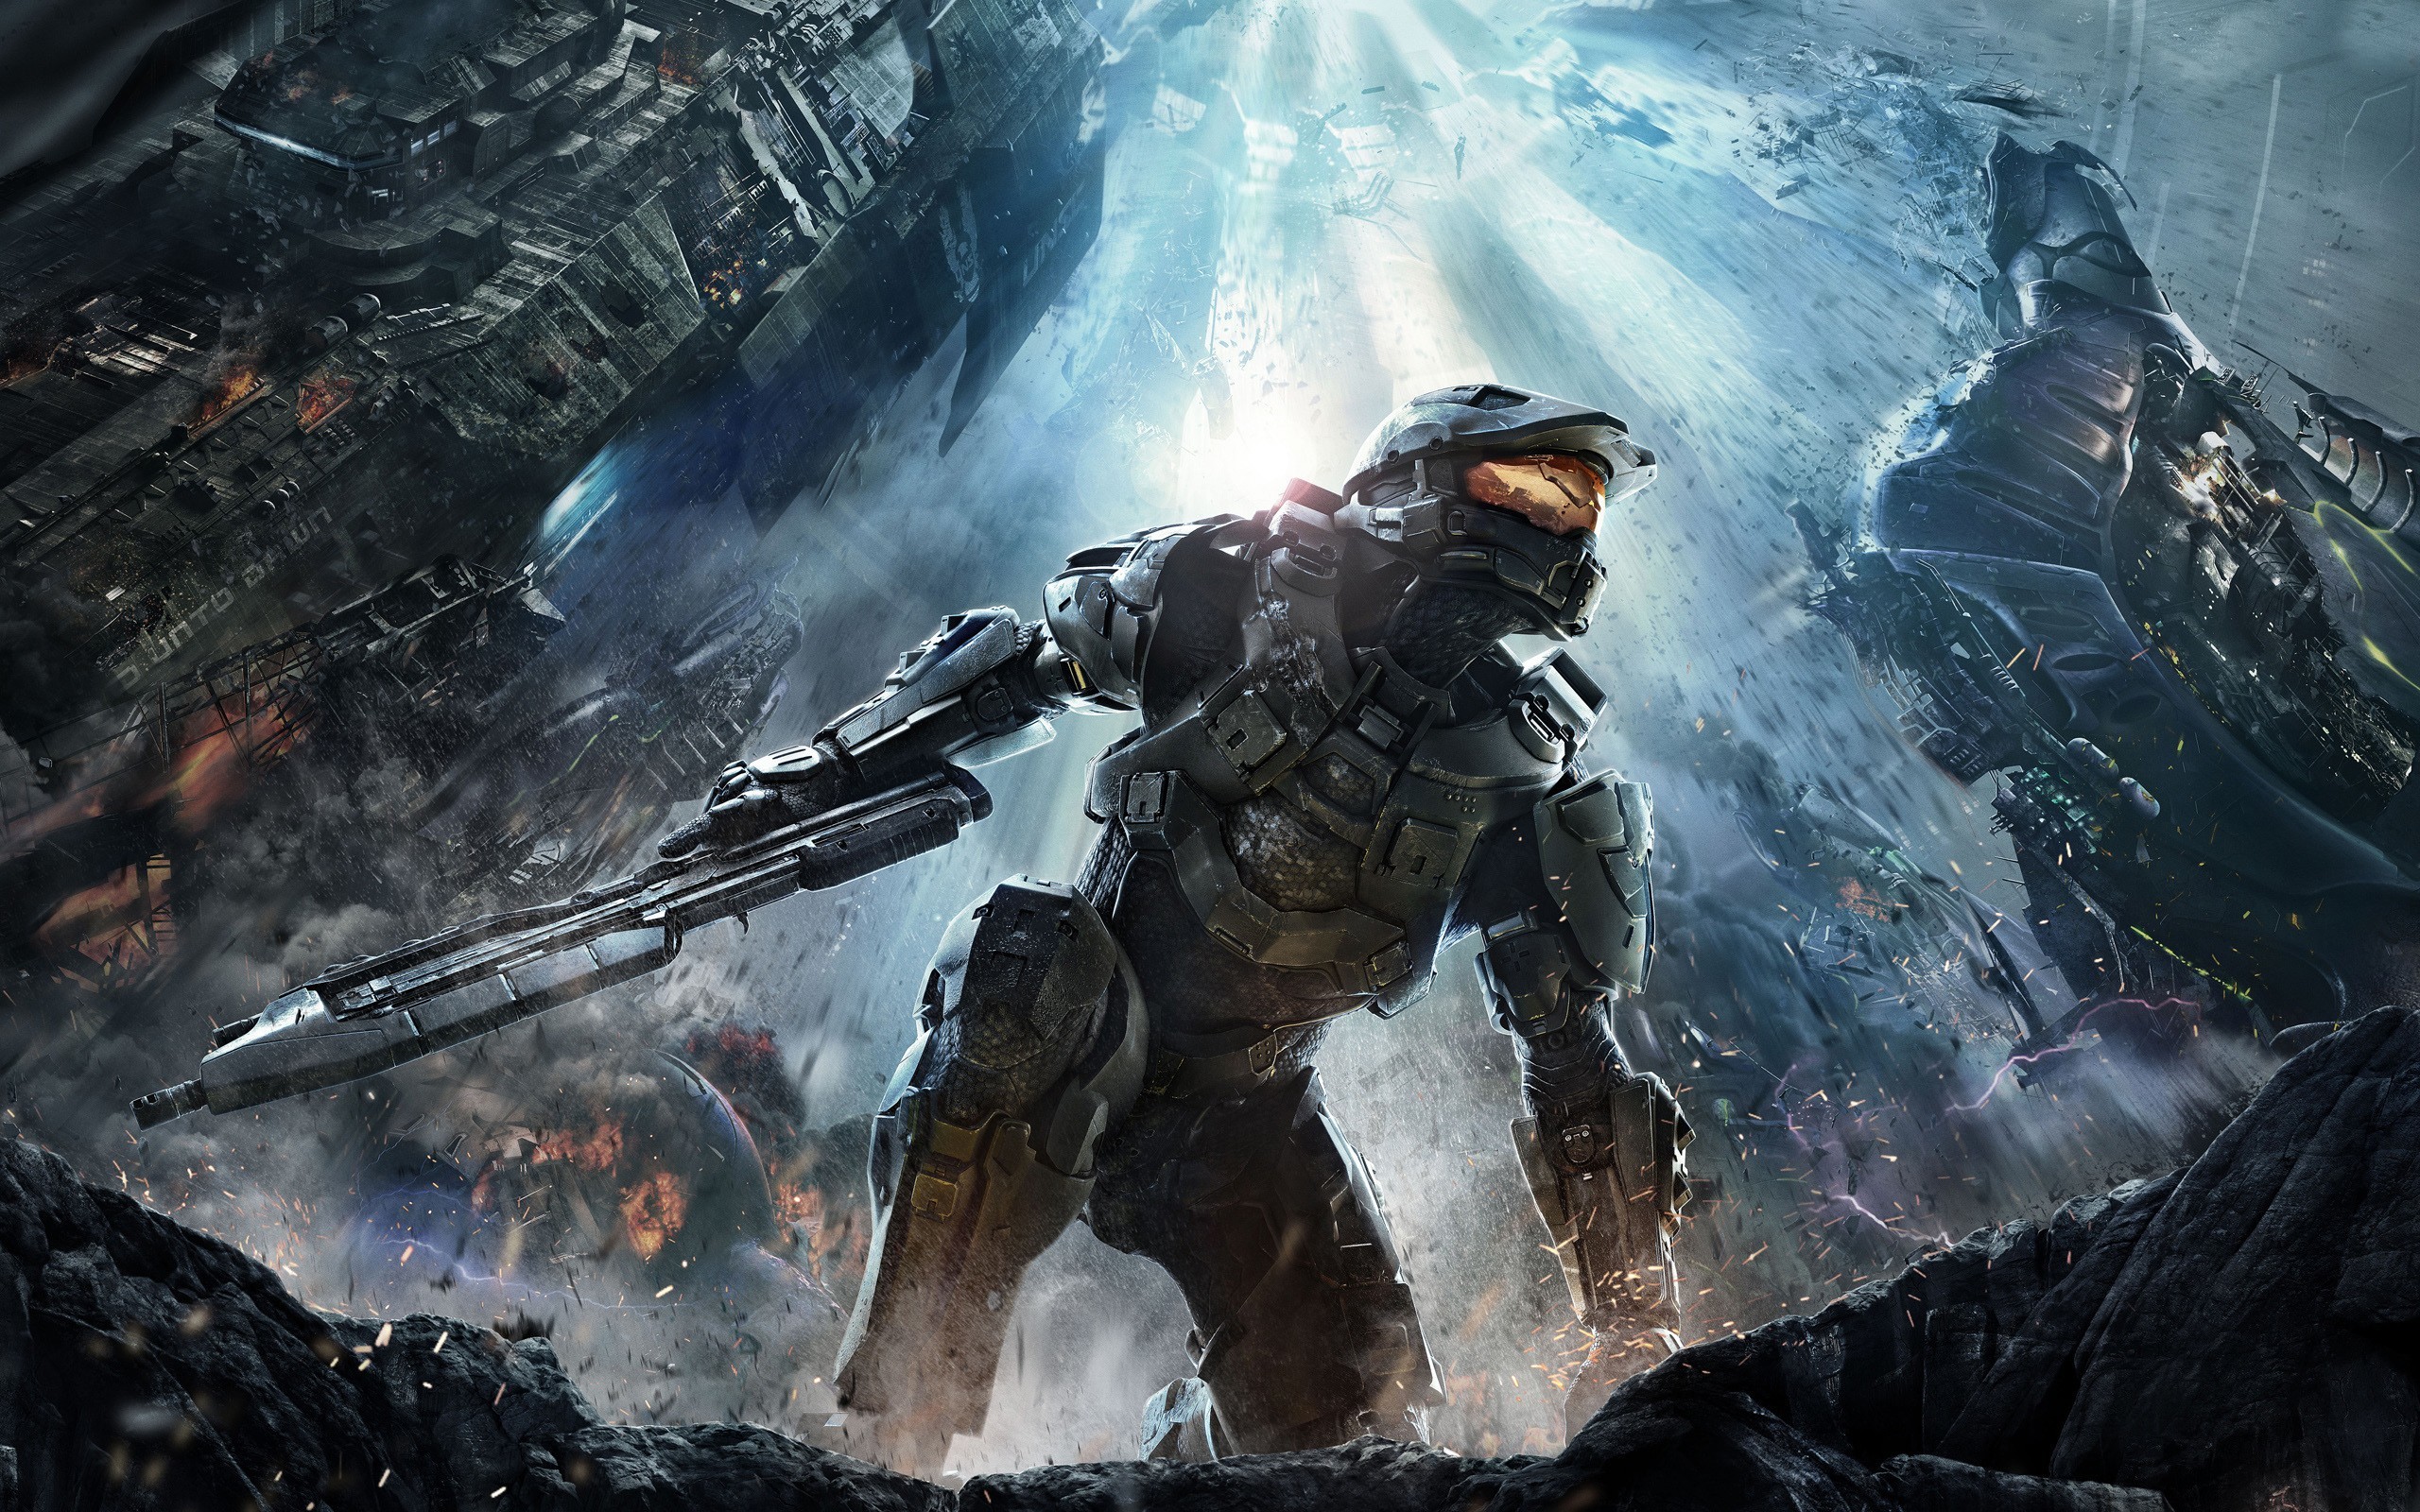 Halo-5-Master-Chief-Wide-Wallpapers.jpg (2560Ã1600) | Wallpaper Desktop |  Pinterest | Wallpaper desktop and Wallpaper